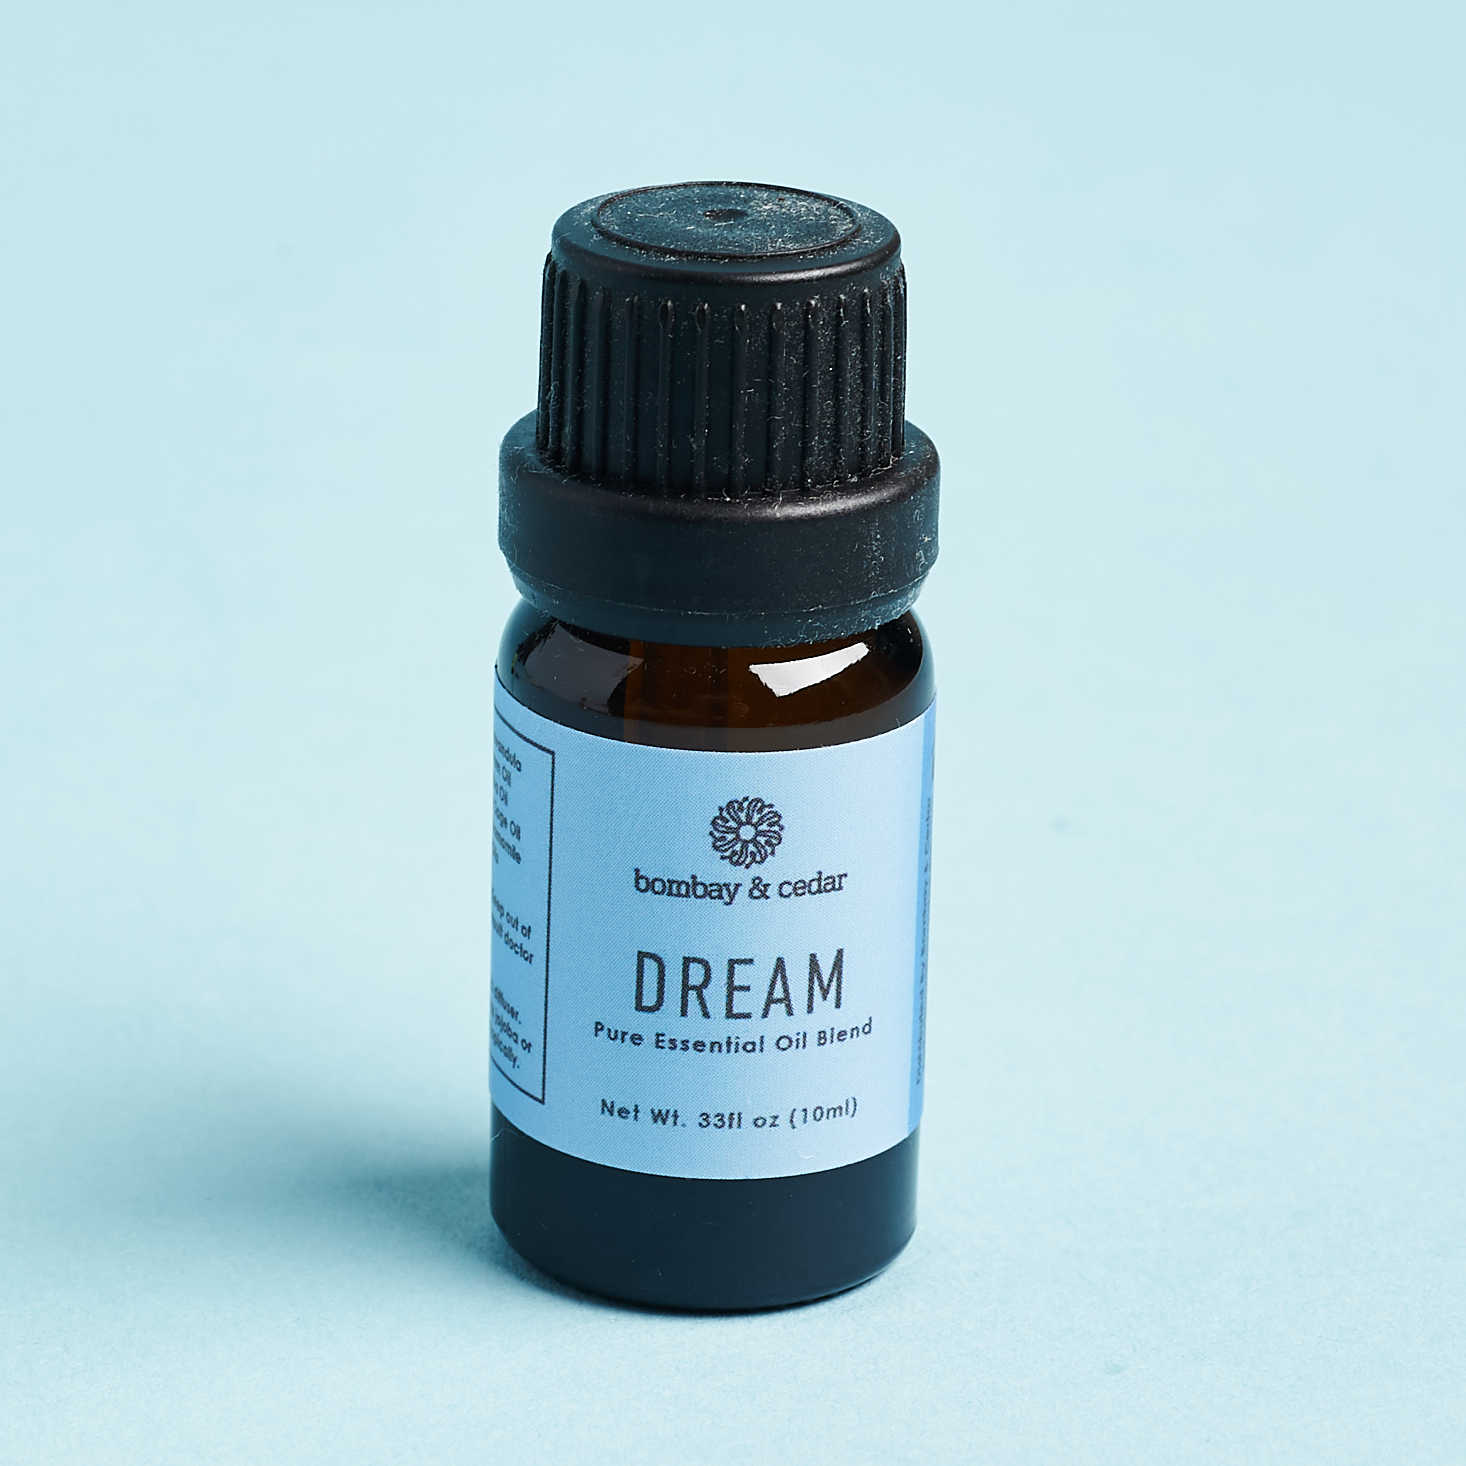 dream essential oil vial with blue label